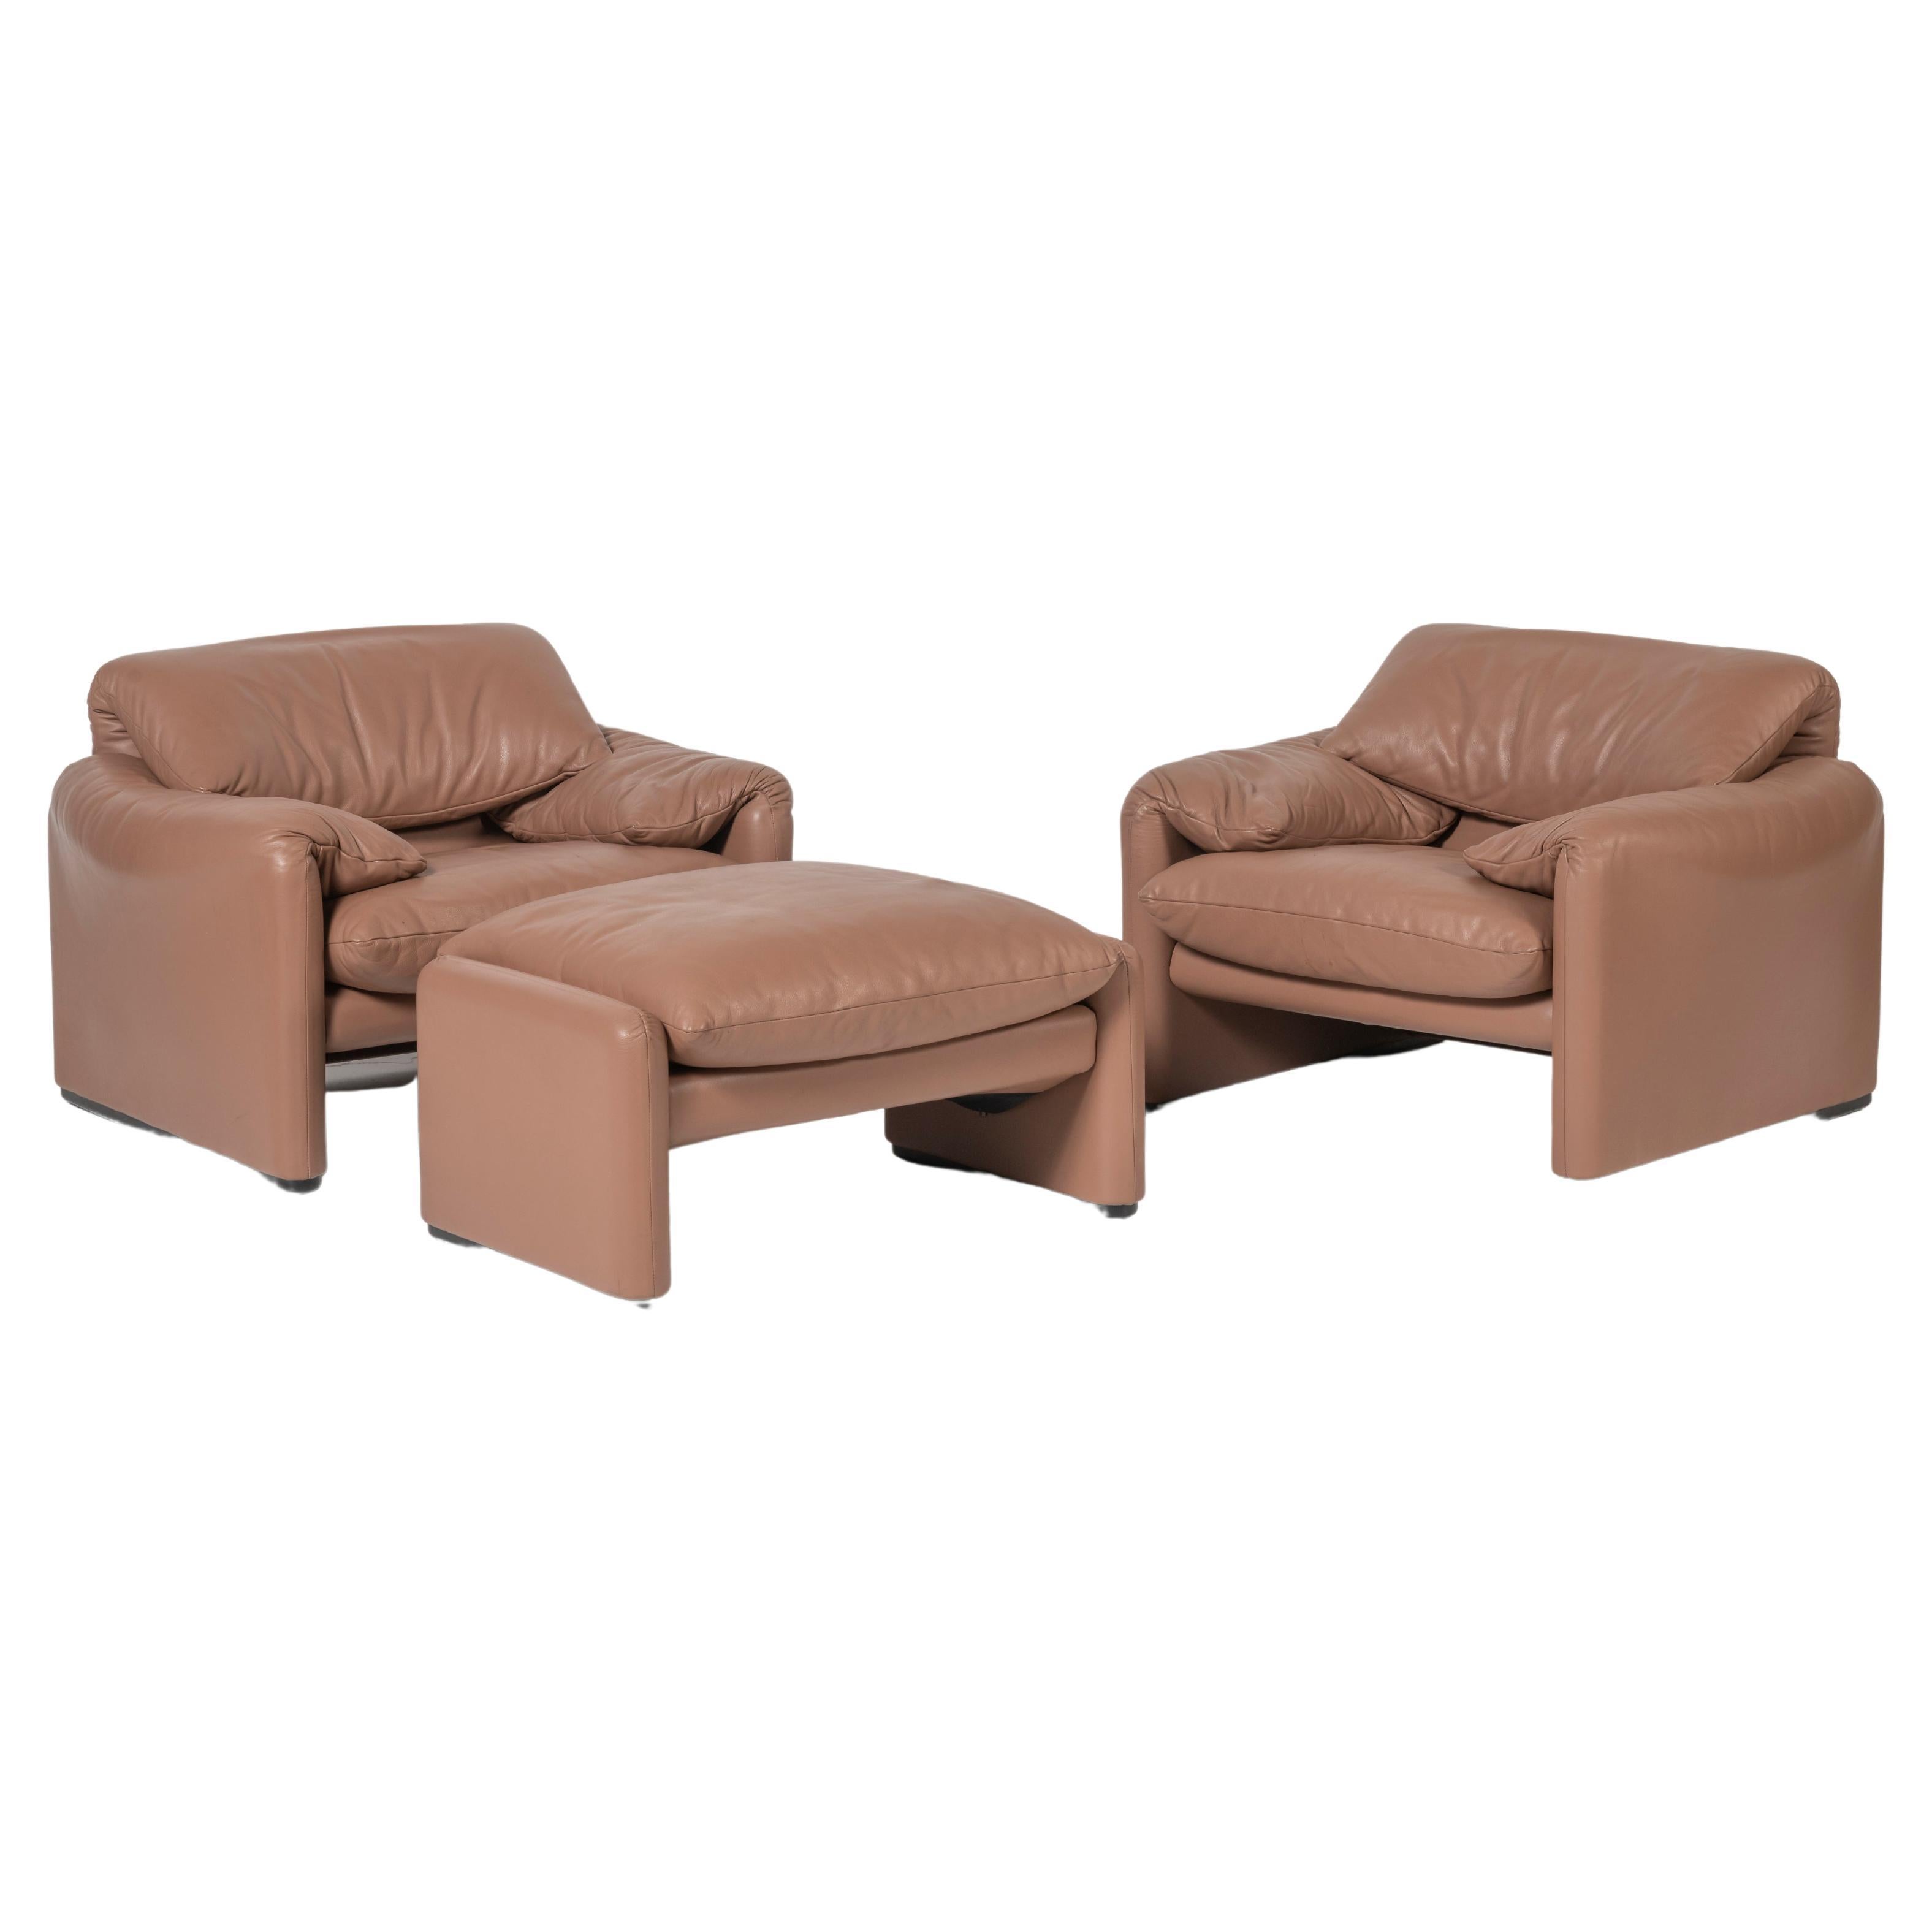 Pair of Maralunga Lounge Chairs with Ottoman in Tan Leather by Cassina